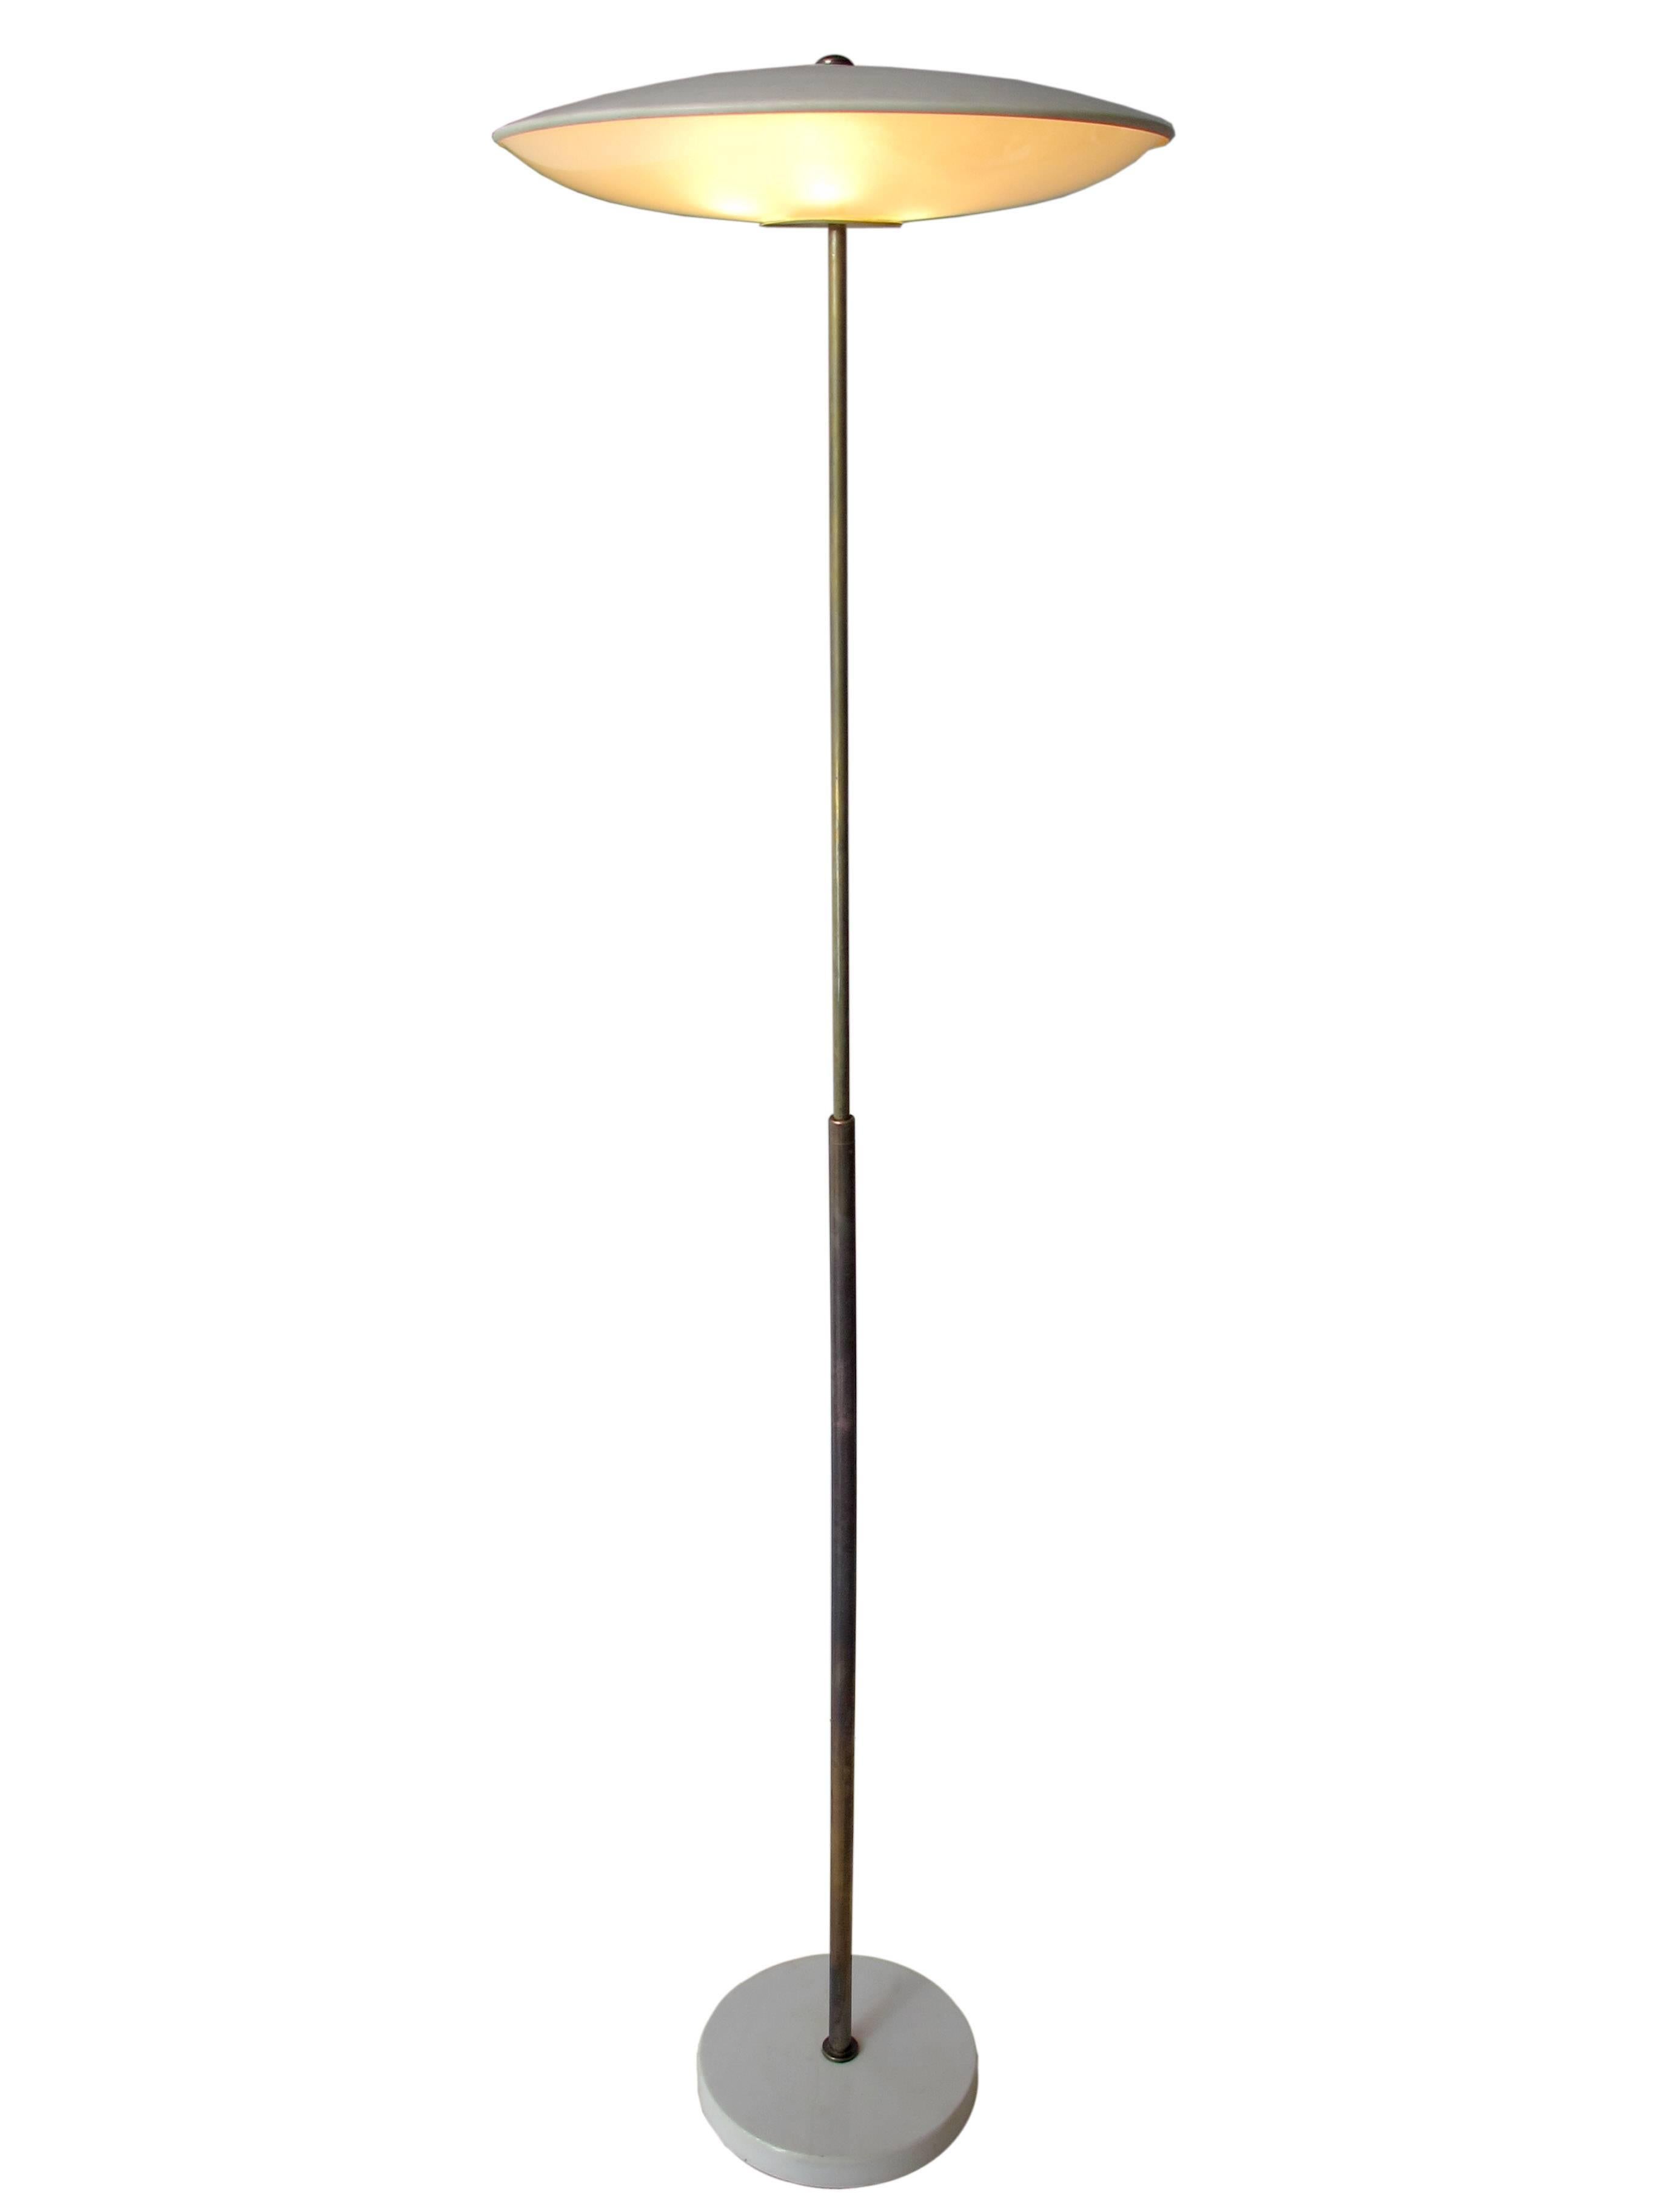 A rare sculptural standing lamp in brass, marble and brass.
Giuseppe Ostuni for O Luce.
c 1960.
Italy
